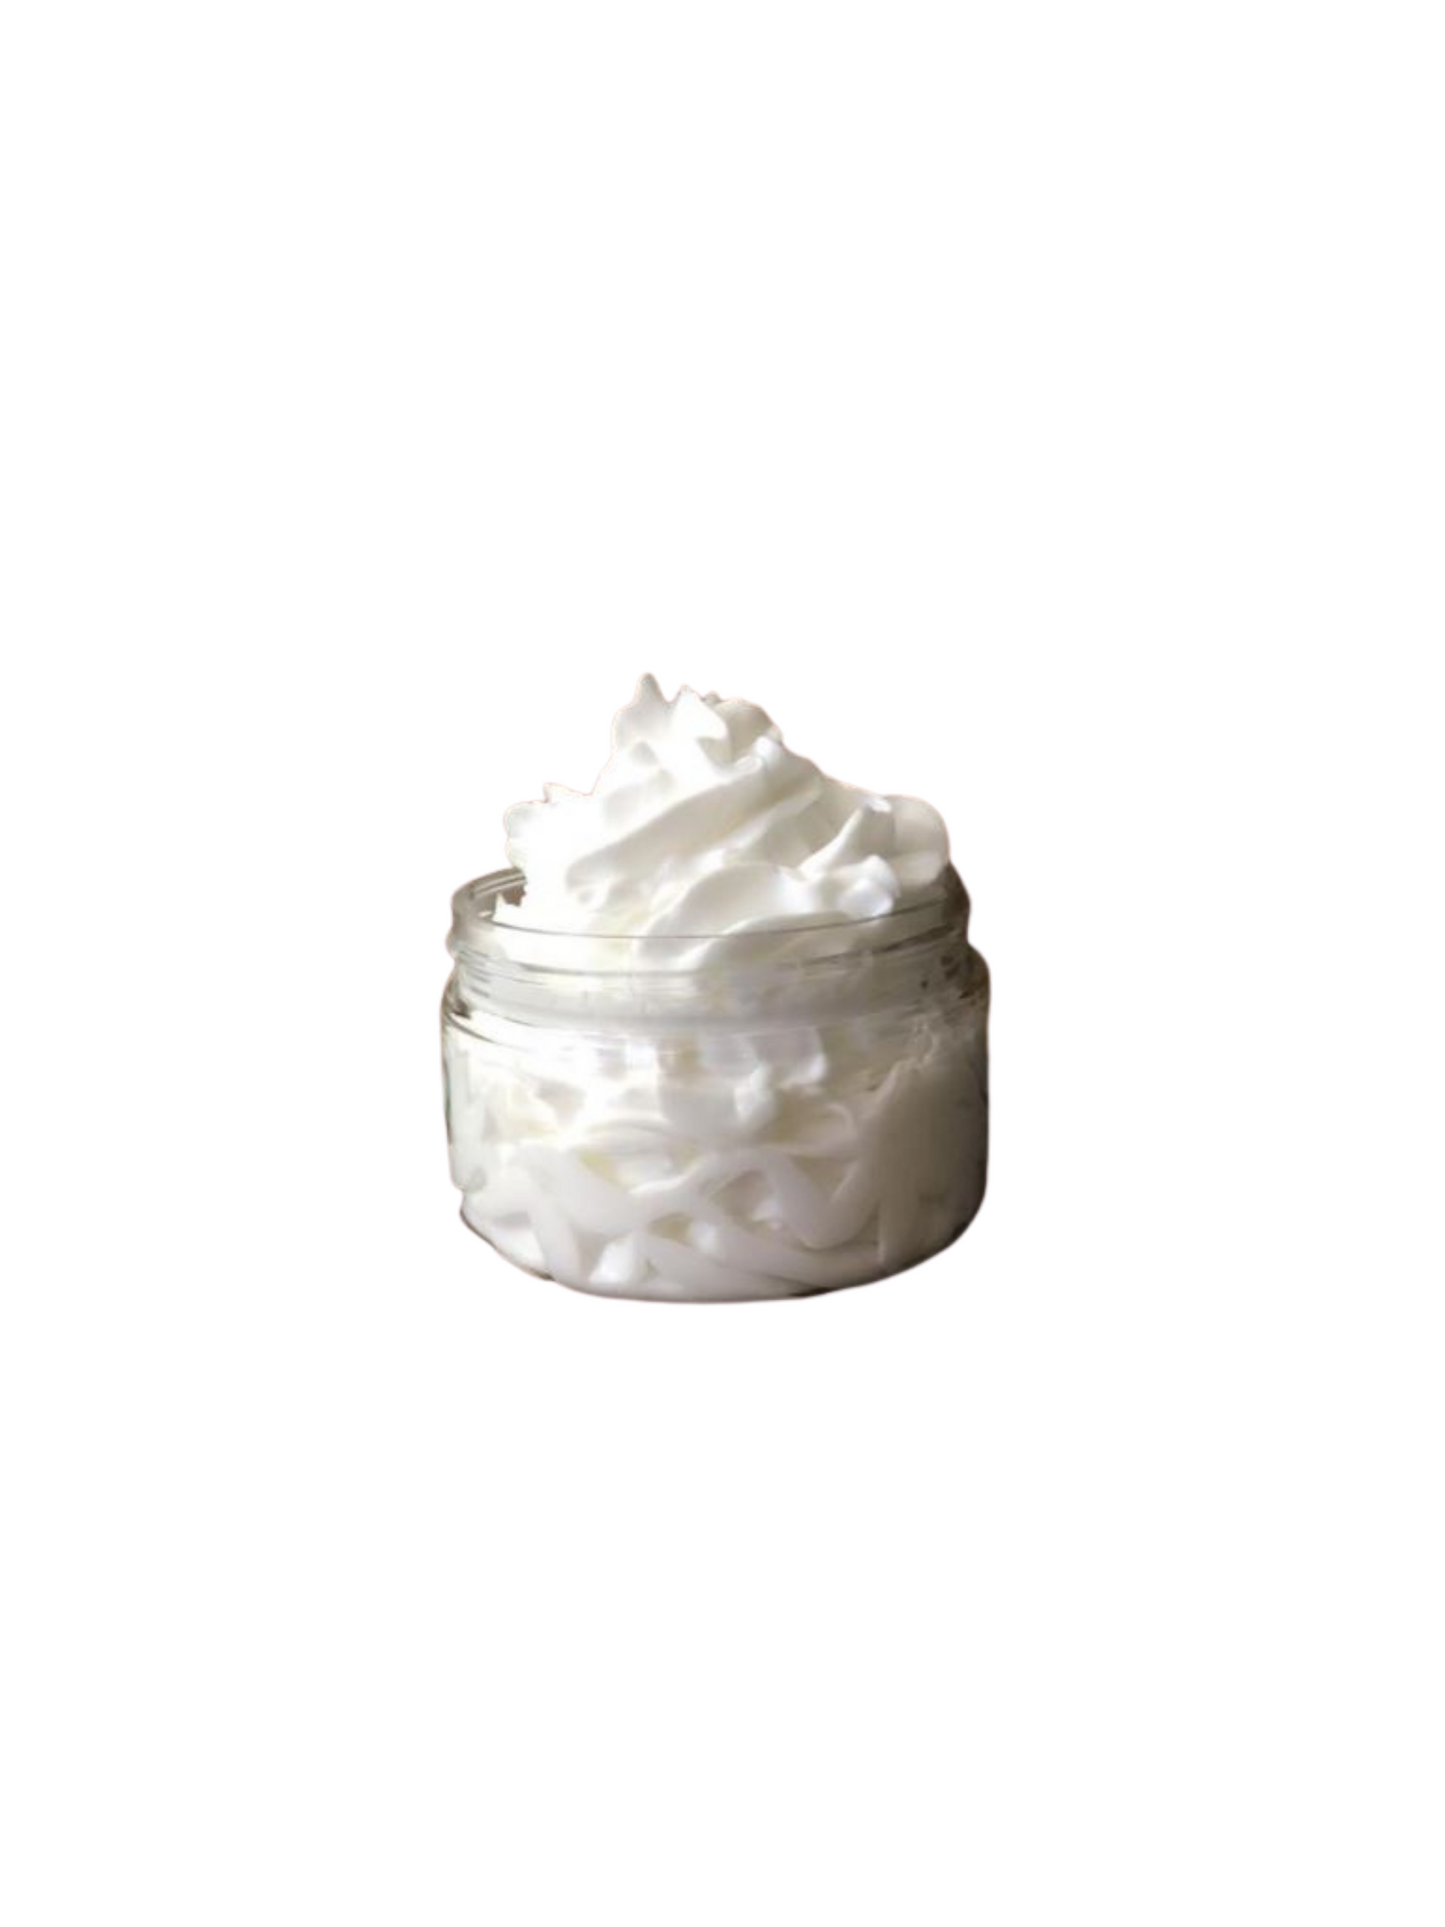 Unscented Hair and Body Butter